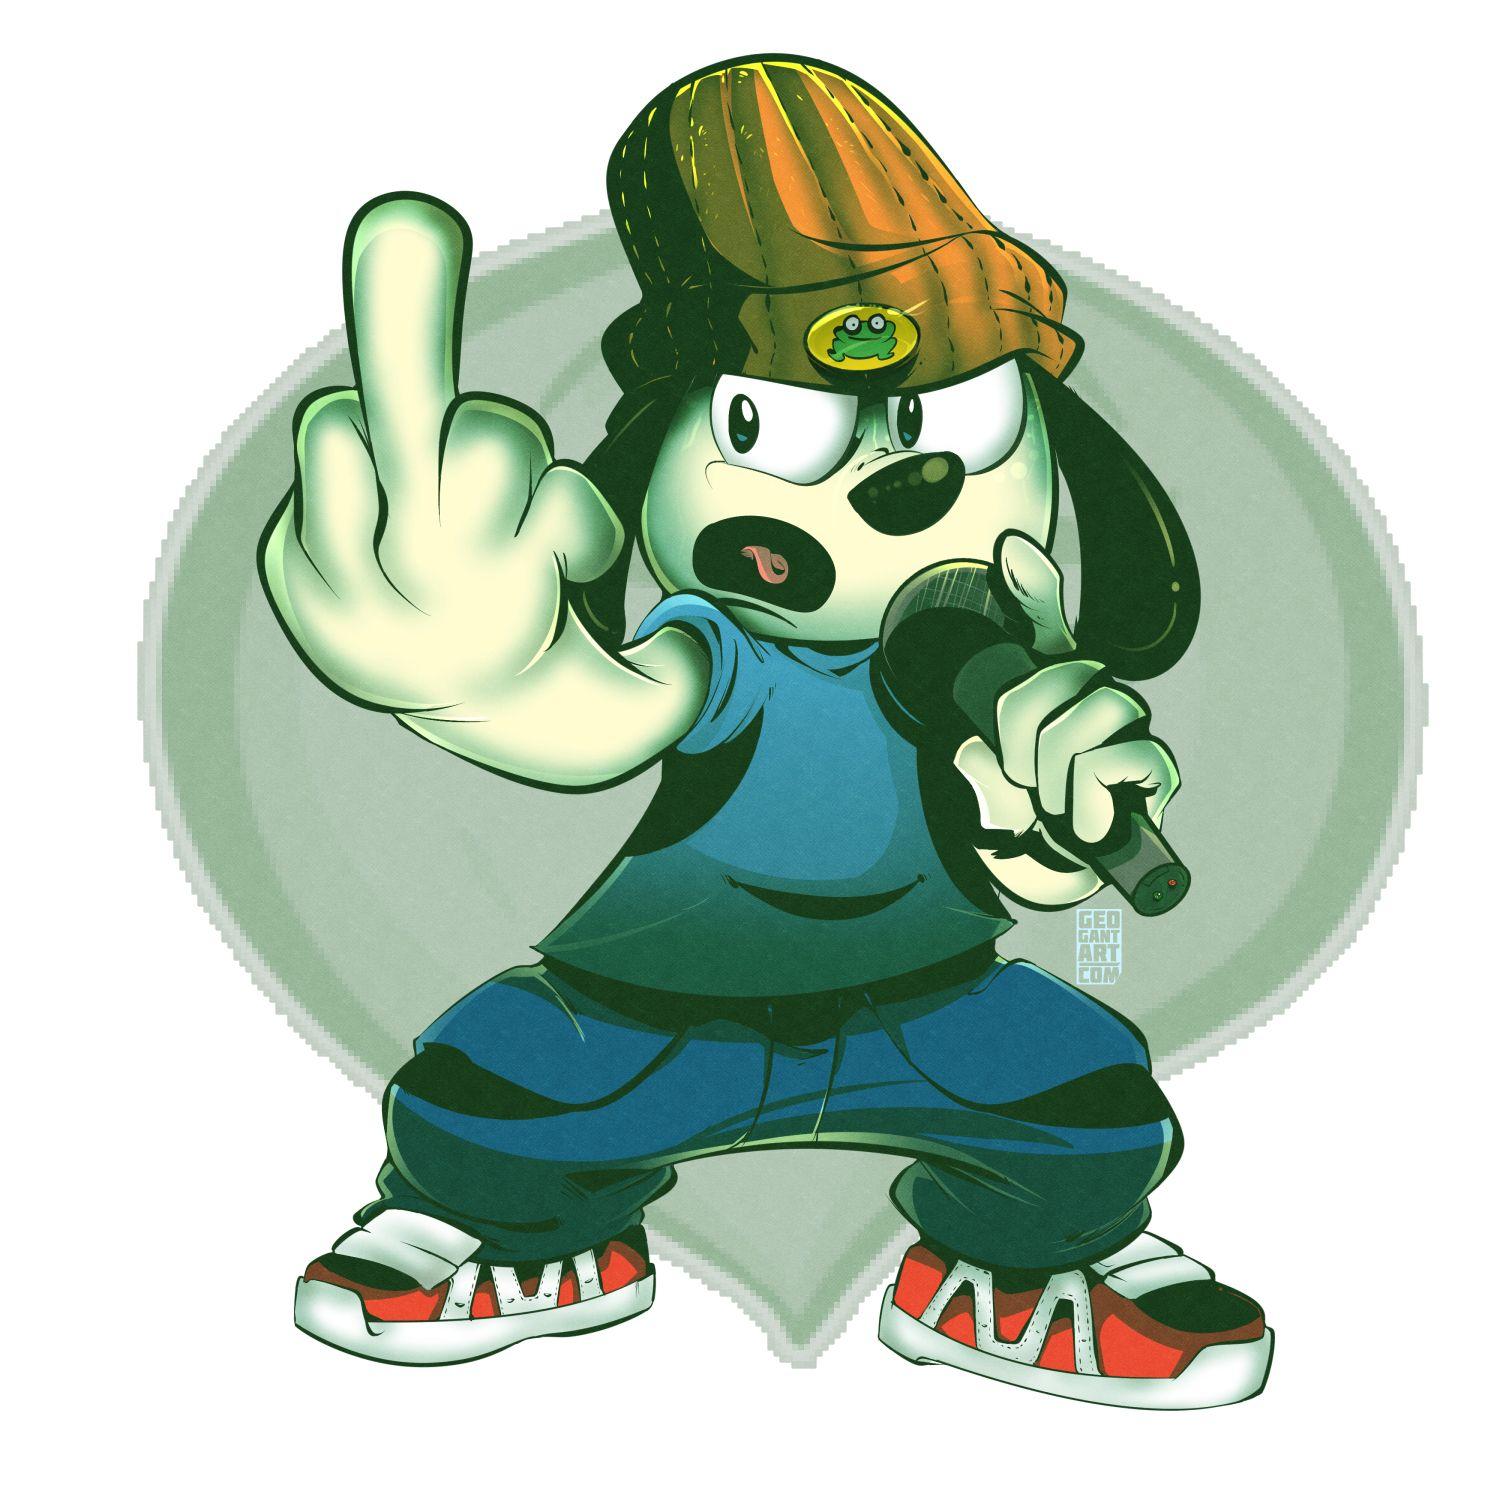 Parappa the Rapper. Rapper, Cartoon, Game character